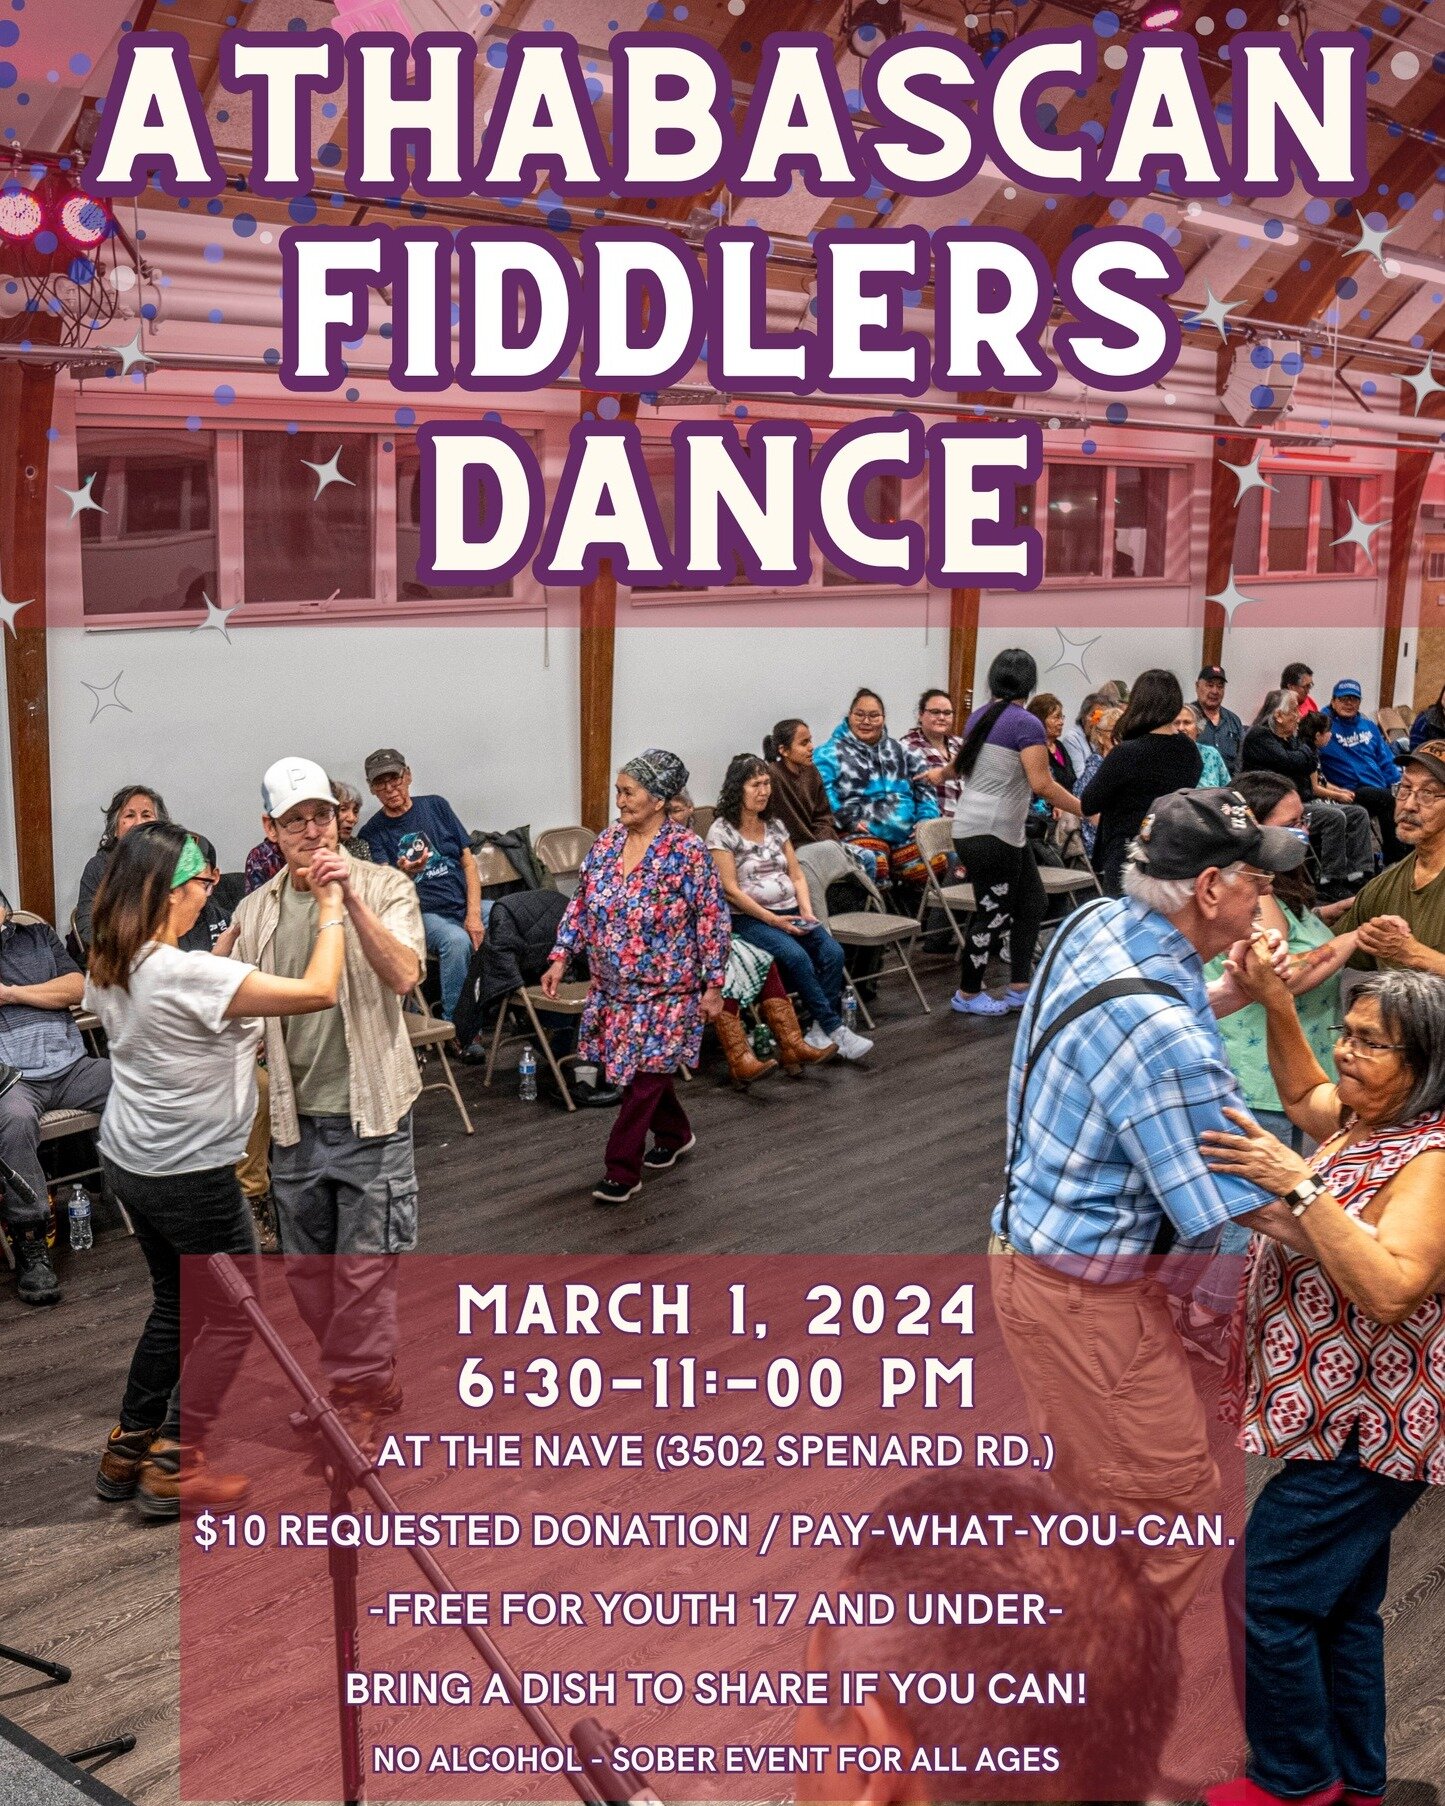 TONIGHT! Join us at 6:30pm for the Athabascan Fiddlers Dance at The Nave Spenard (3502 Spenard Rd). $10 at the door, or pay what you can to support the musicians. FREE for youth 17 and under! This is a sober dance party, no alcohol or drugs permitted